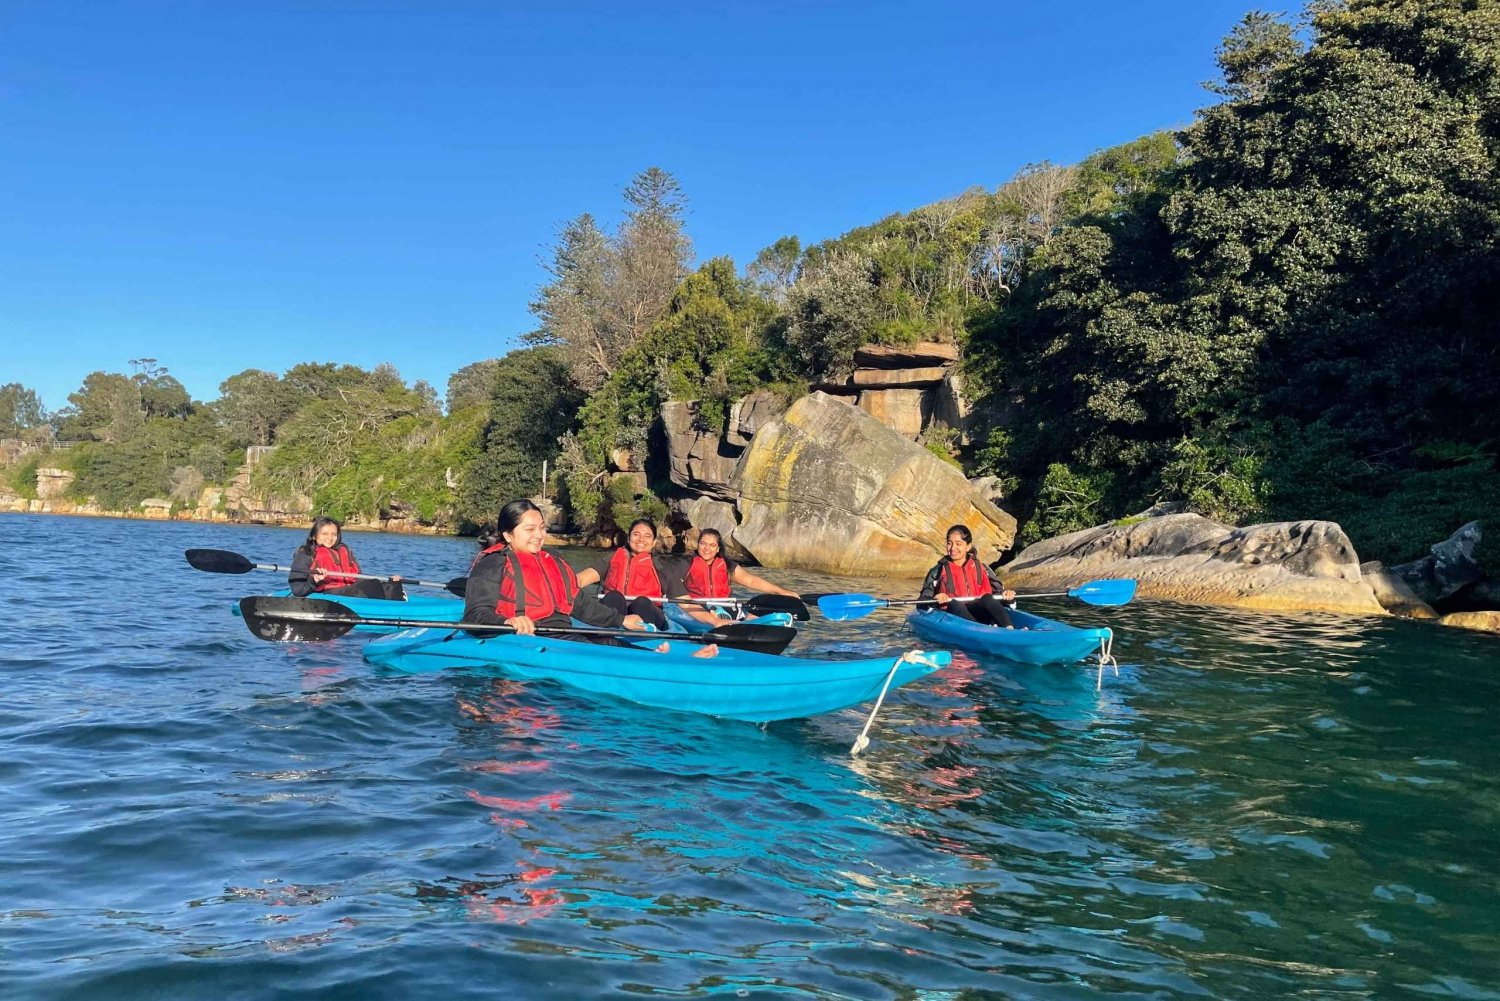 Sydney: Guided Clearview Kayak Tour of Manly Cove Beaches